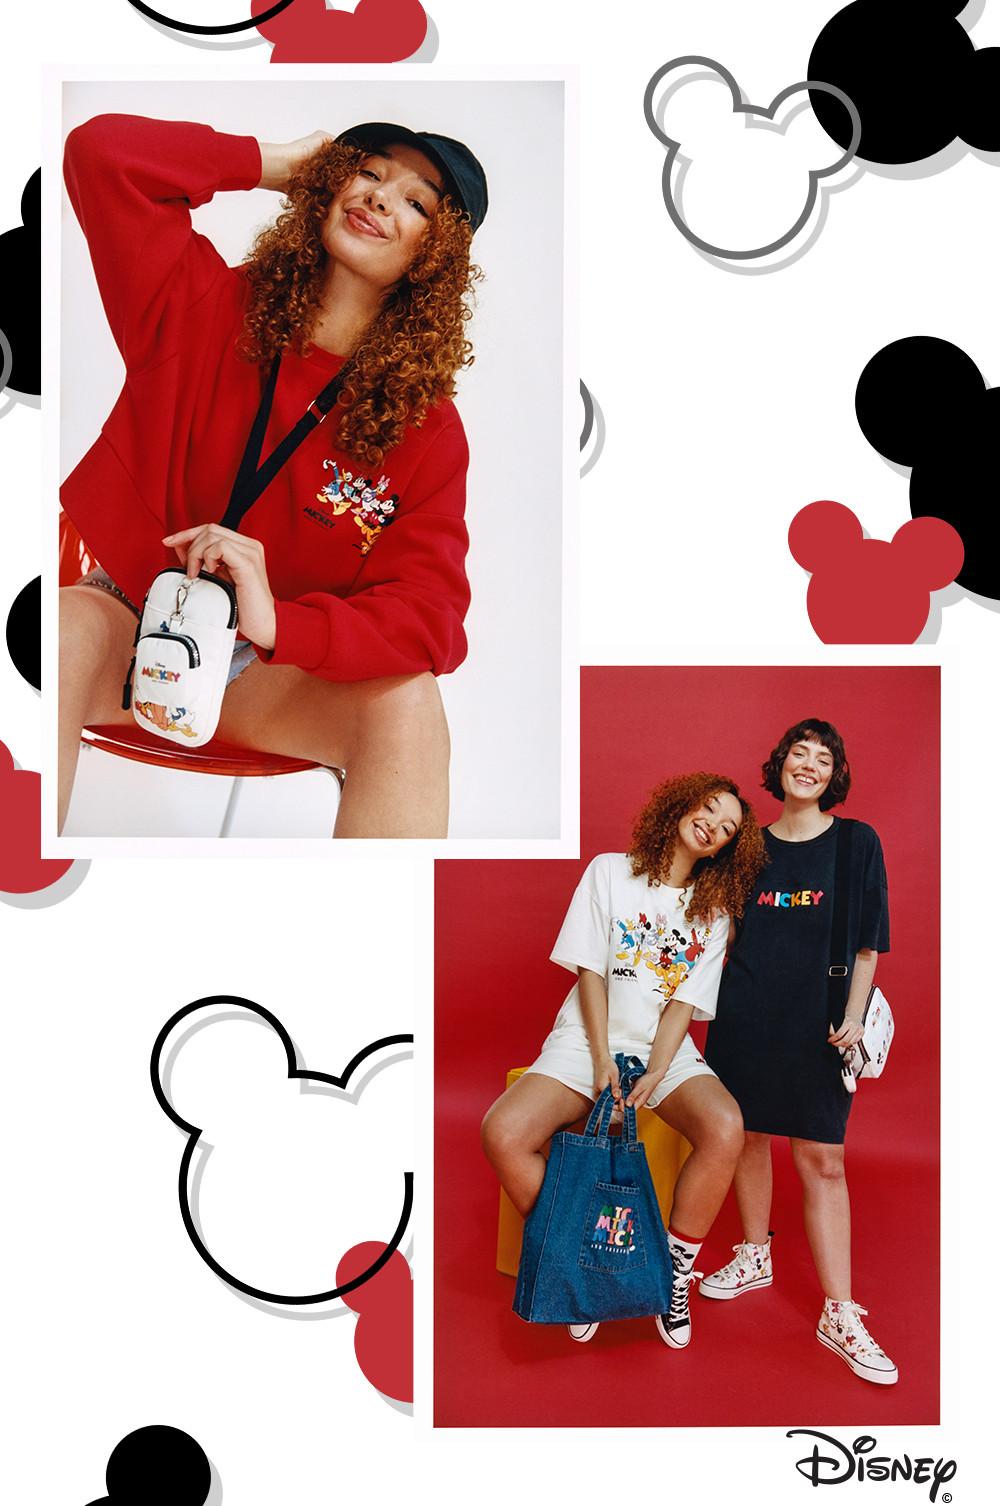 Women wearing Mickey T-shirt dress, Jumper and T-shirt with bags and accessories